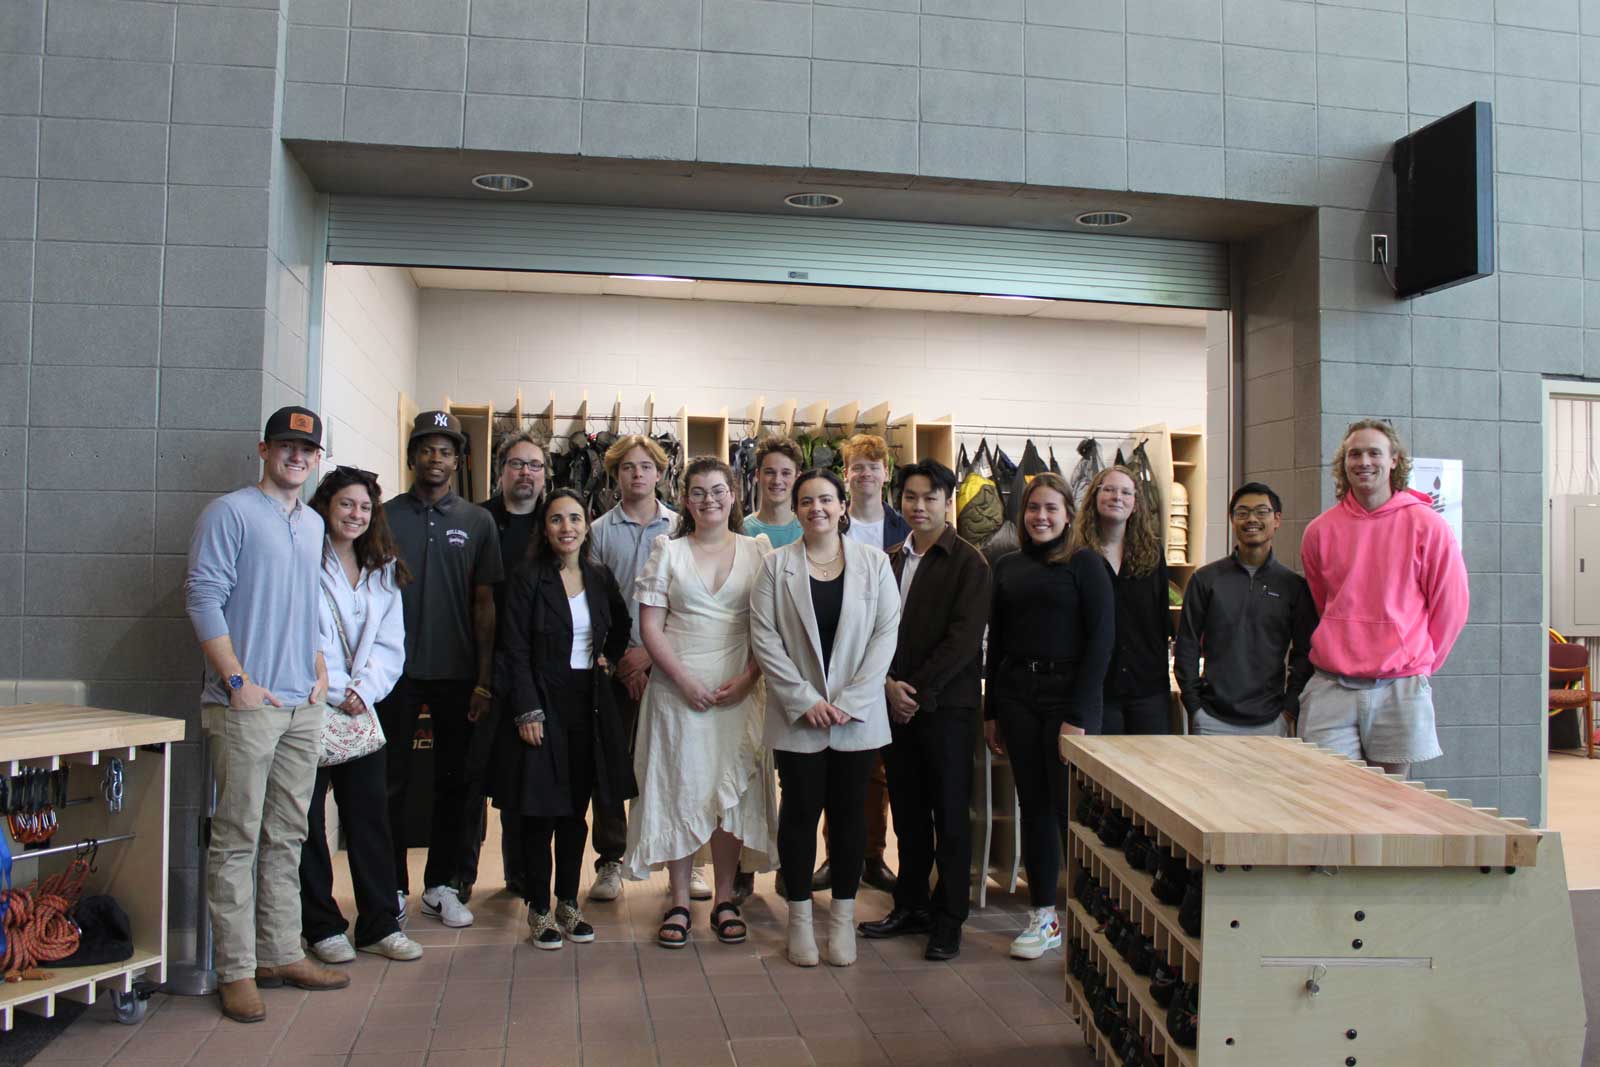 The students and their professors stand for a group photo in front of their project.